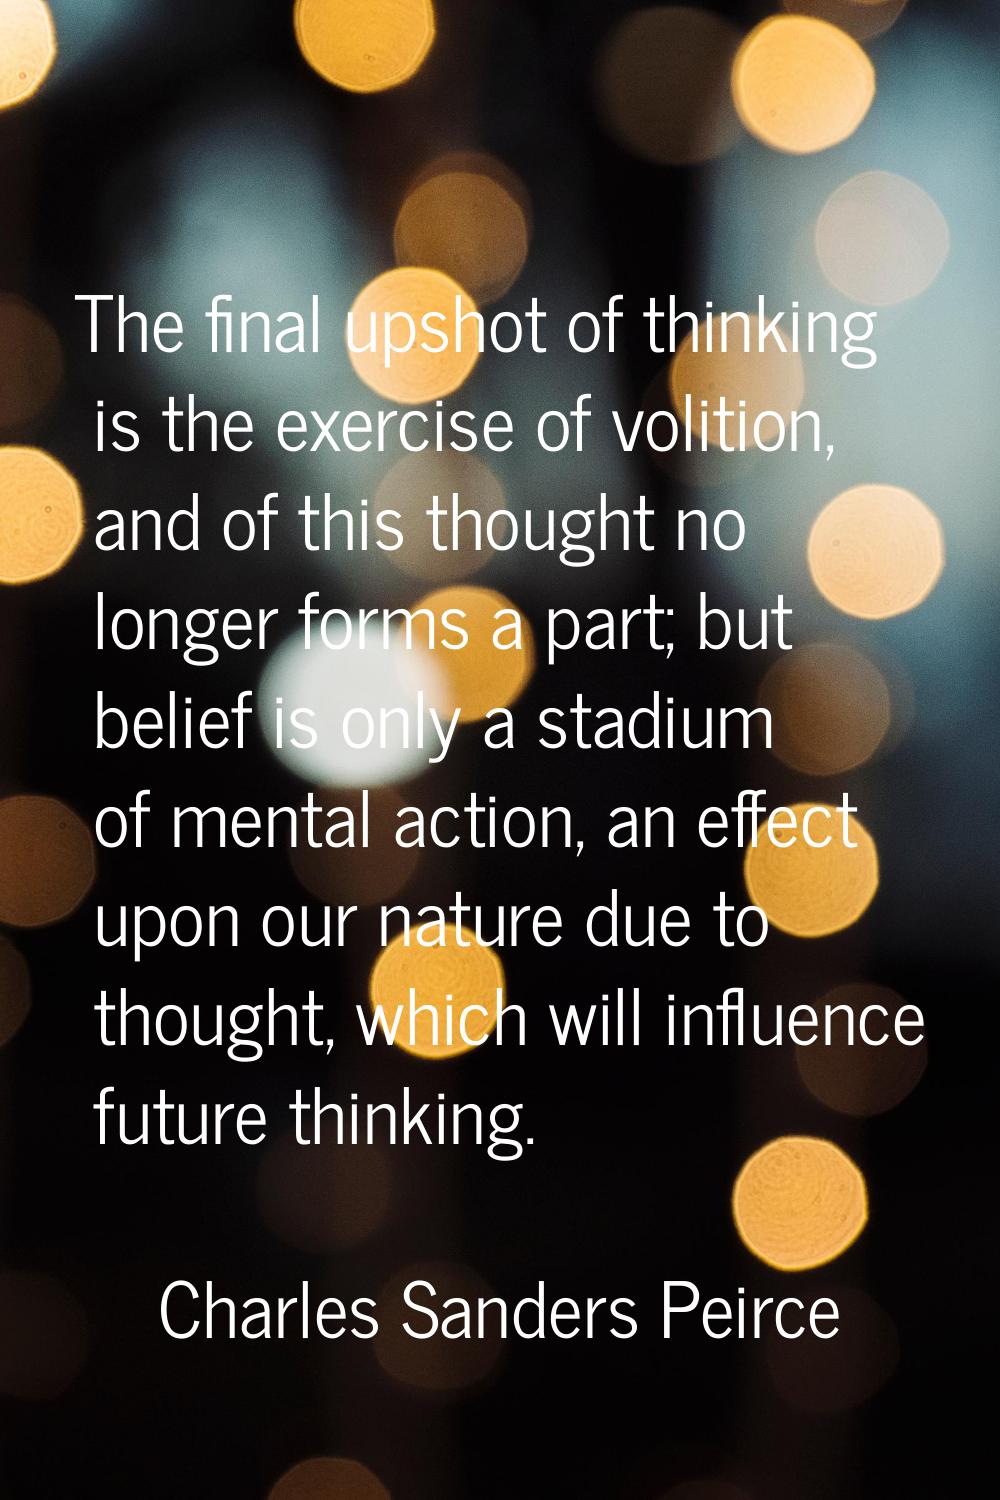 The final upshot of thinking is the exercise of volition, and of this thought no longer forms a par